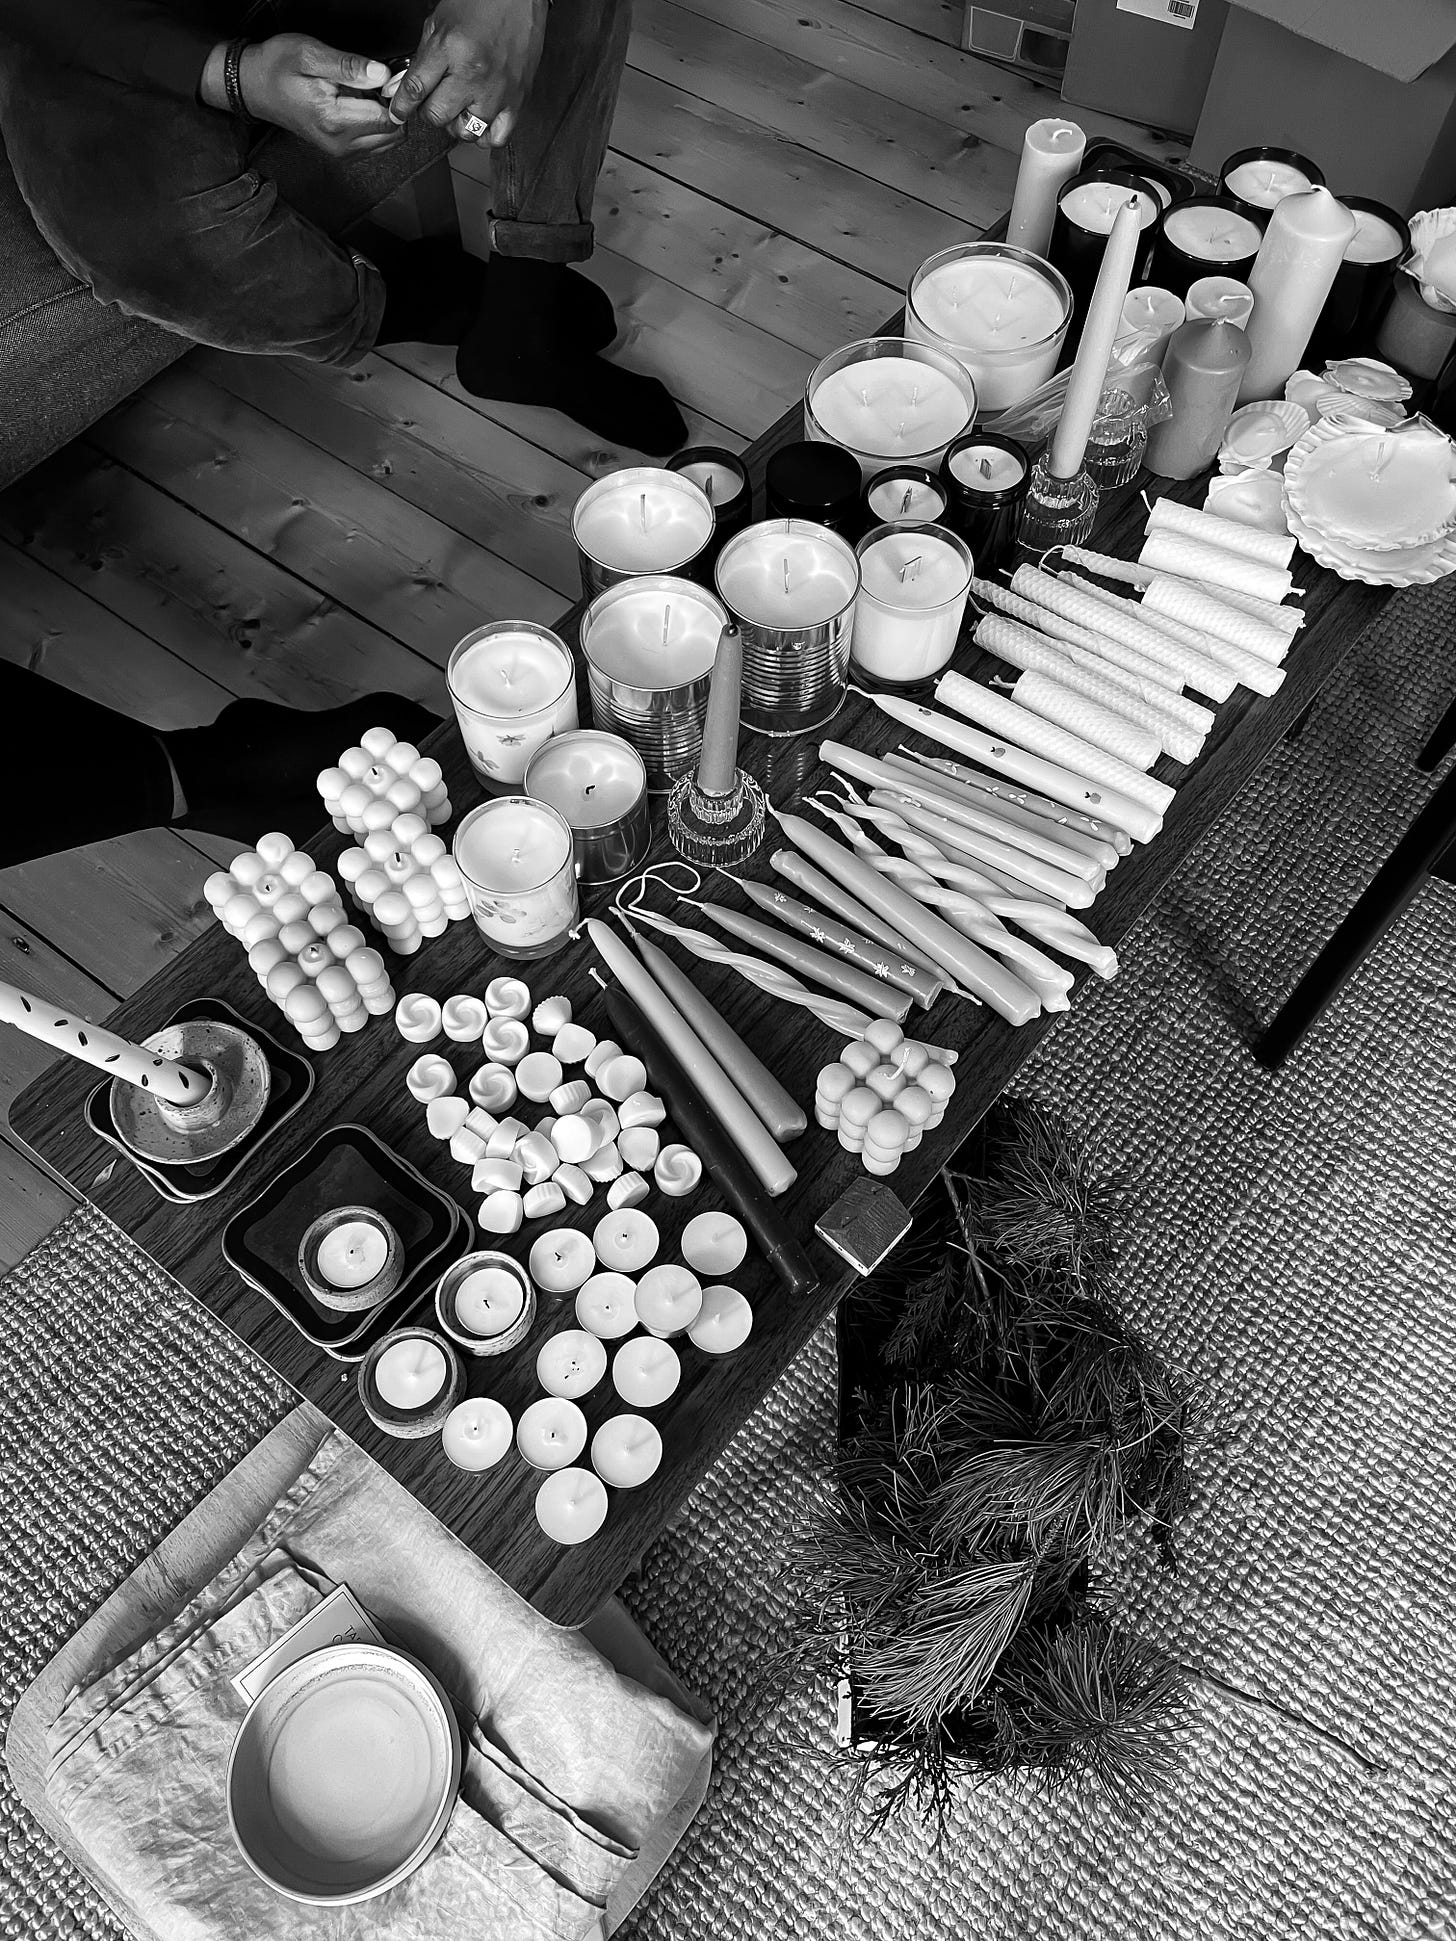 A coffee table with a wide array of different types of candles: tins, tea lights, dinner candles all laid out. There are two people's feet under the table.